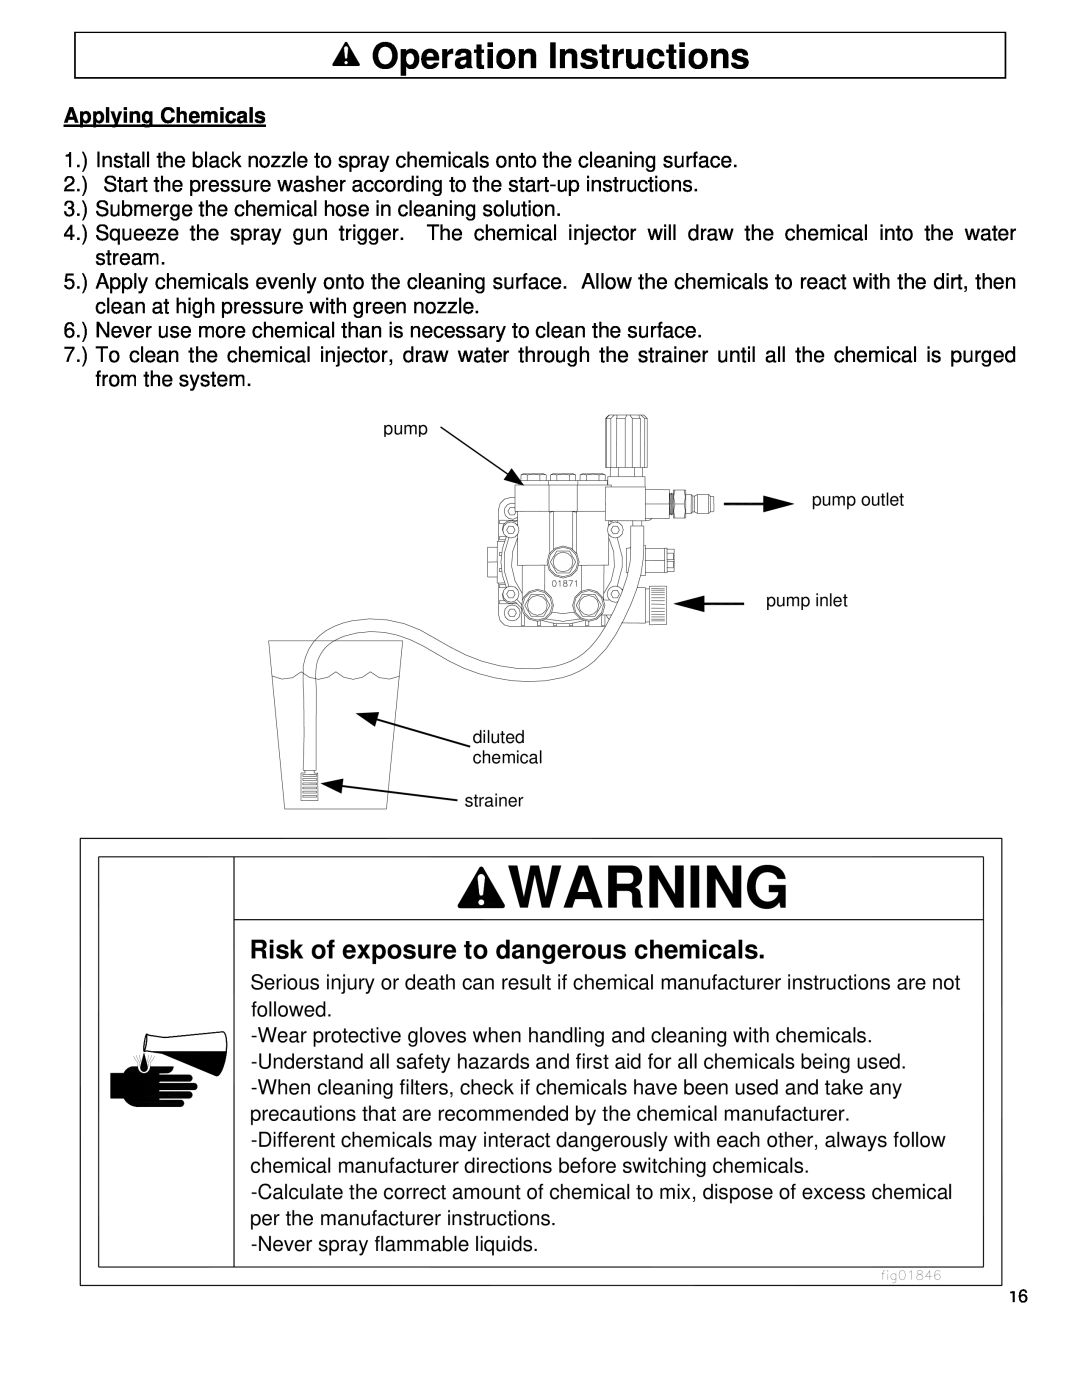 North Star M1578111F owner manual Operation Instructions, Risk of exposure to dangerous chemicals, Applying Chemicals 